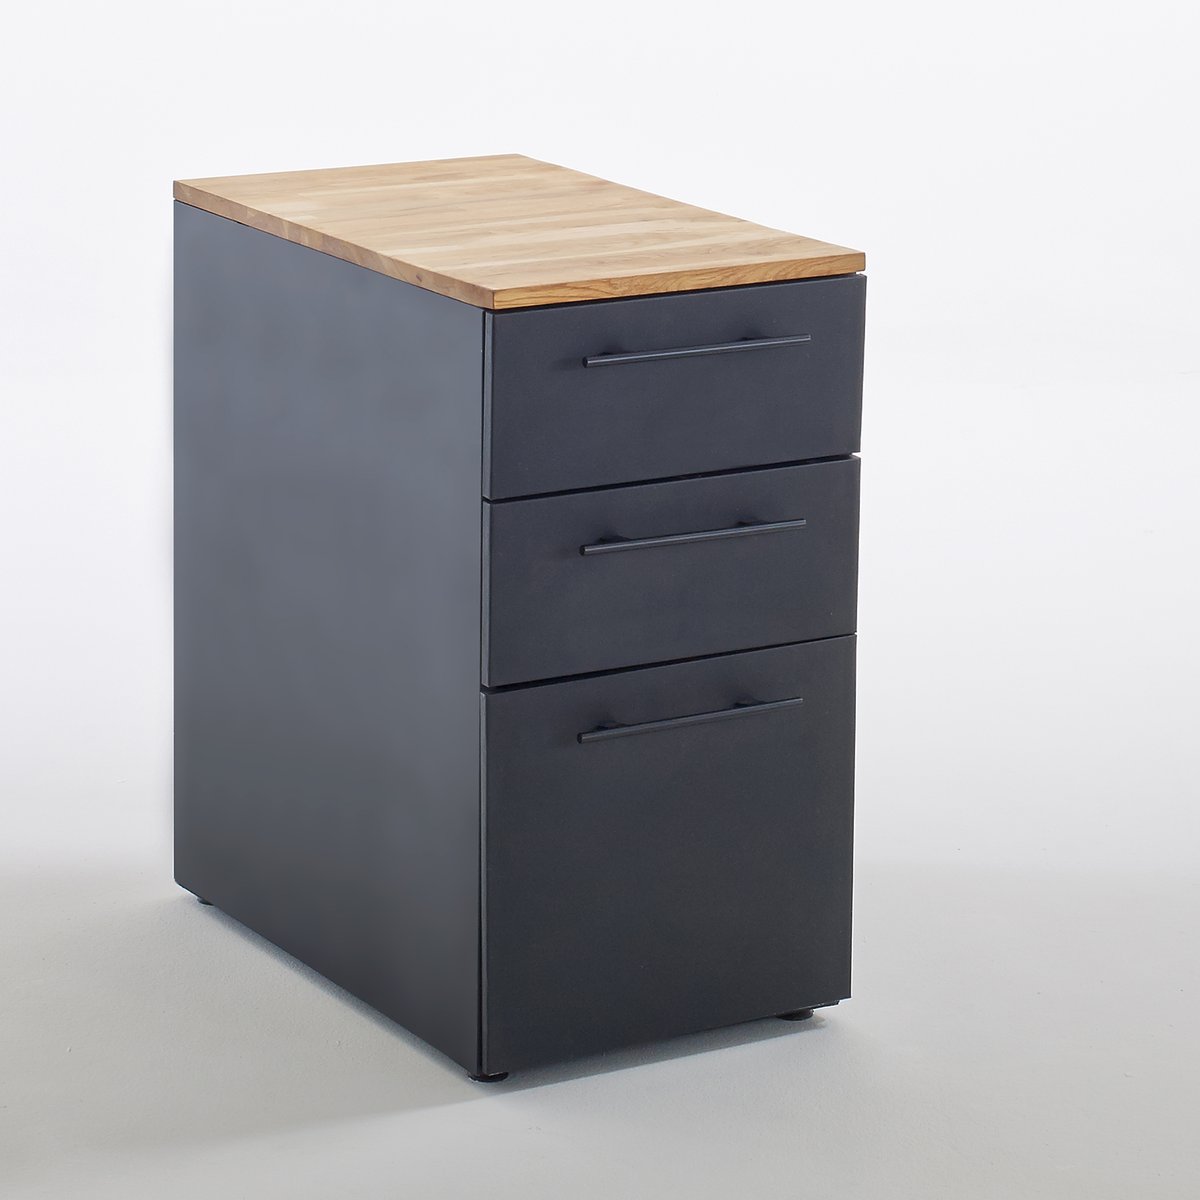 Image of Hiba Industrial Style 3-Drawer Desk Cabinet